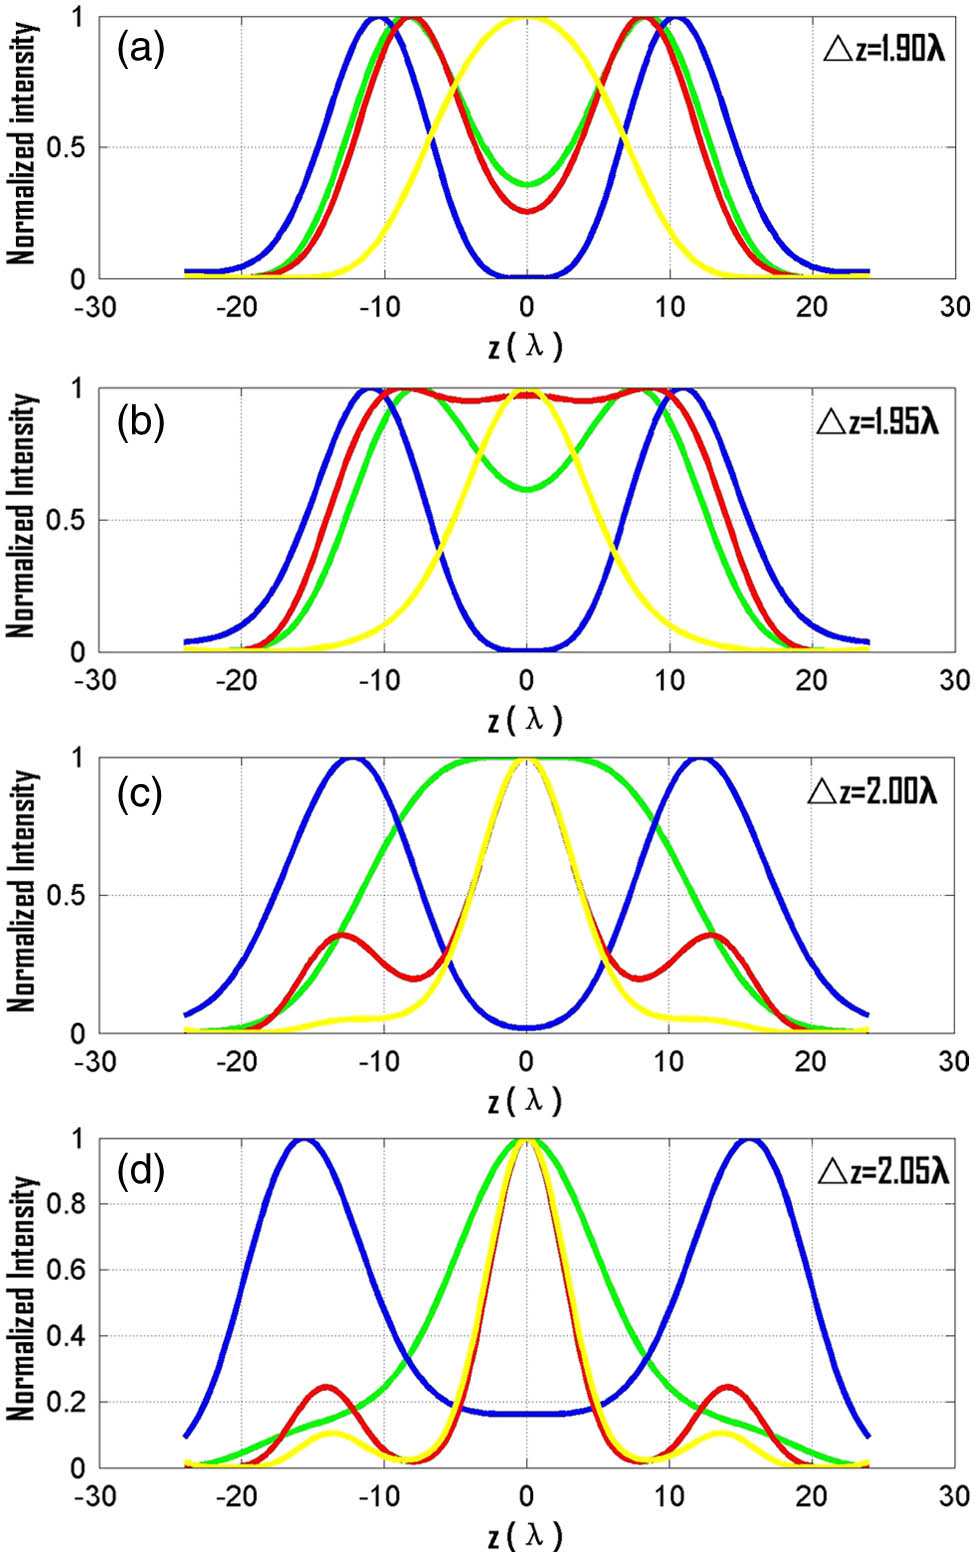 Longitudinal magnetization distribution along the z axis at different θ1, θ2, and Δz. The green line is obtained when θ1=1.19, θ2=1.21; blue line is obtained when θ1=1.19, θ2=1.23; red line is obtained when θ1=1.17, θ2=1.21; and yellow line is obtained when θ1=1.17, θ2=1.19. (a) Δz=1.90λ; (b) Δz=1.95λ; (c) Δz=2.00λ; (d) Δz=2.05λ.